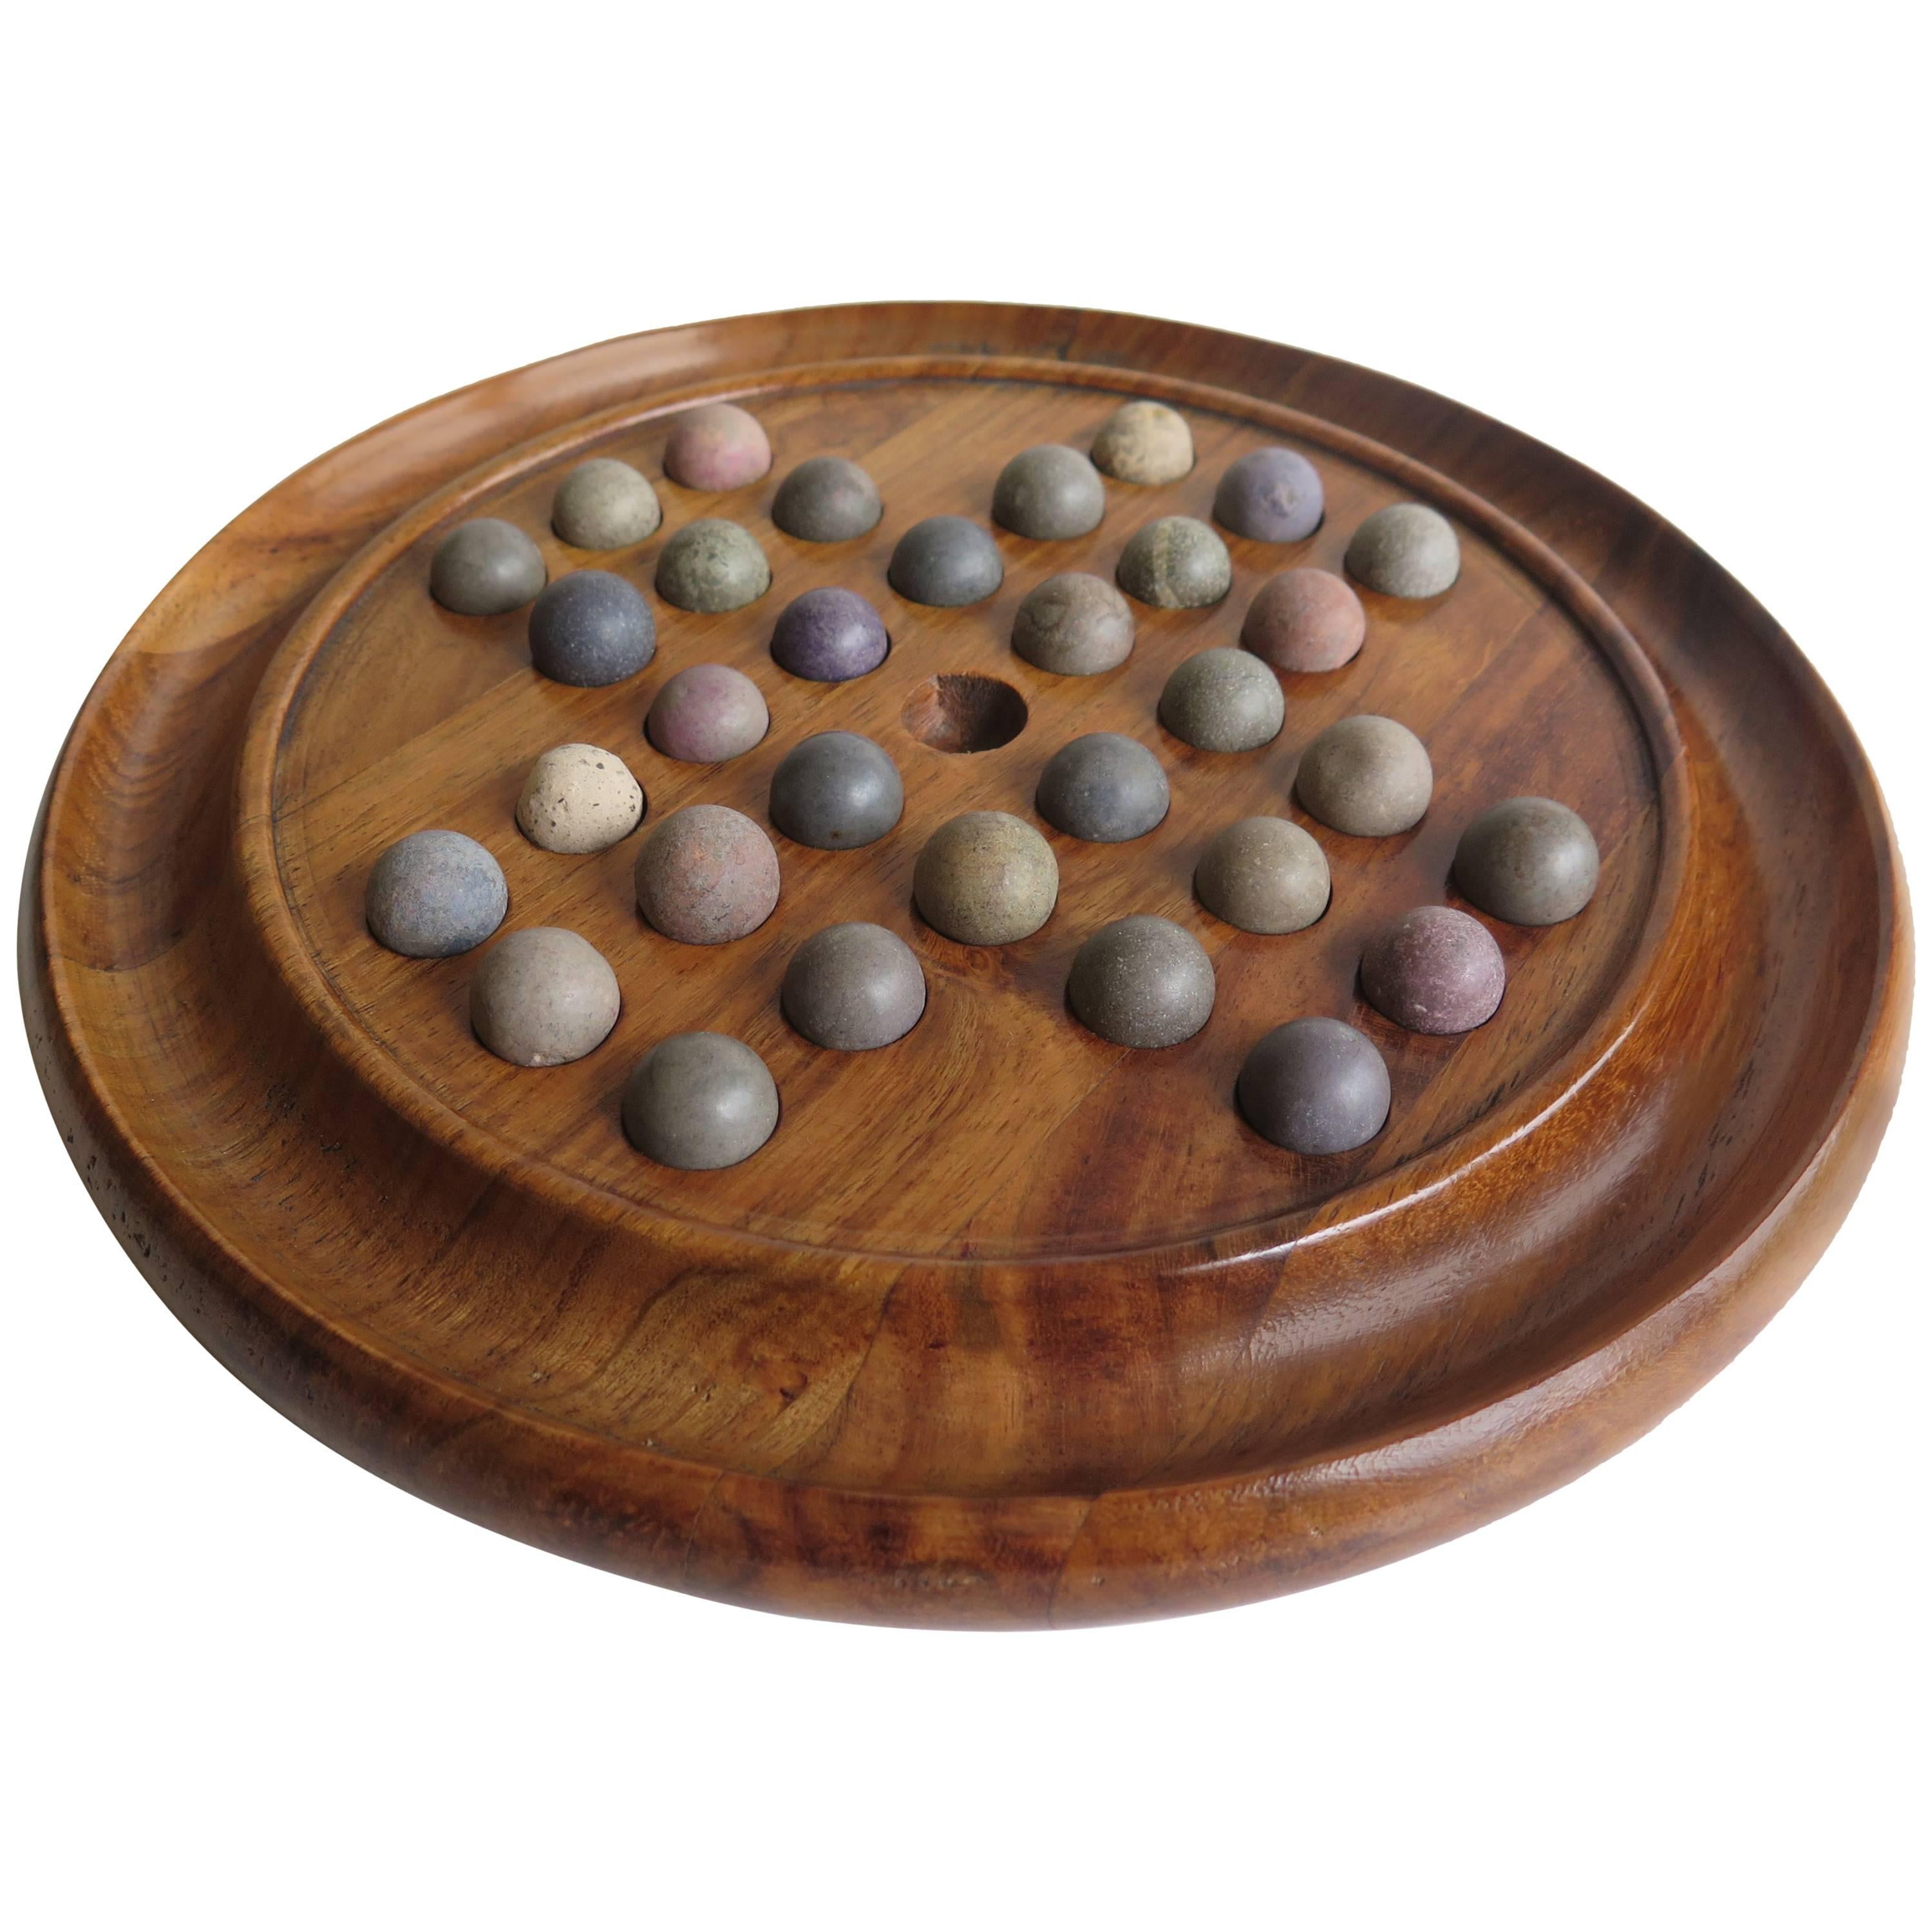 19th Century, Marble Solitaire Board Game, Walnut Board with 32 Handmade Marbles